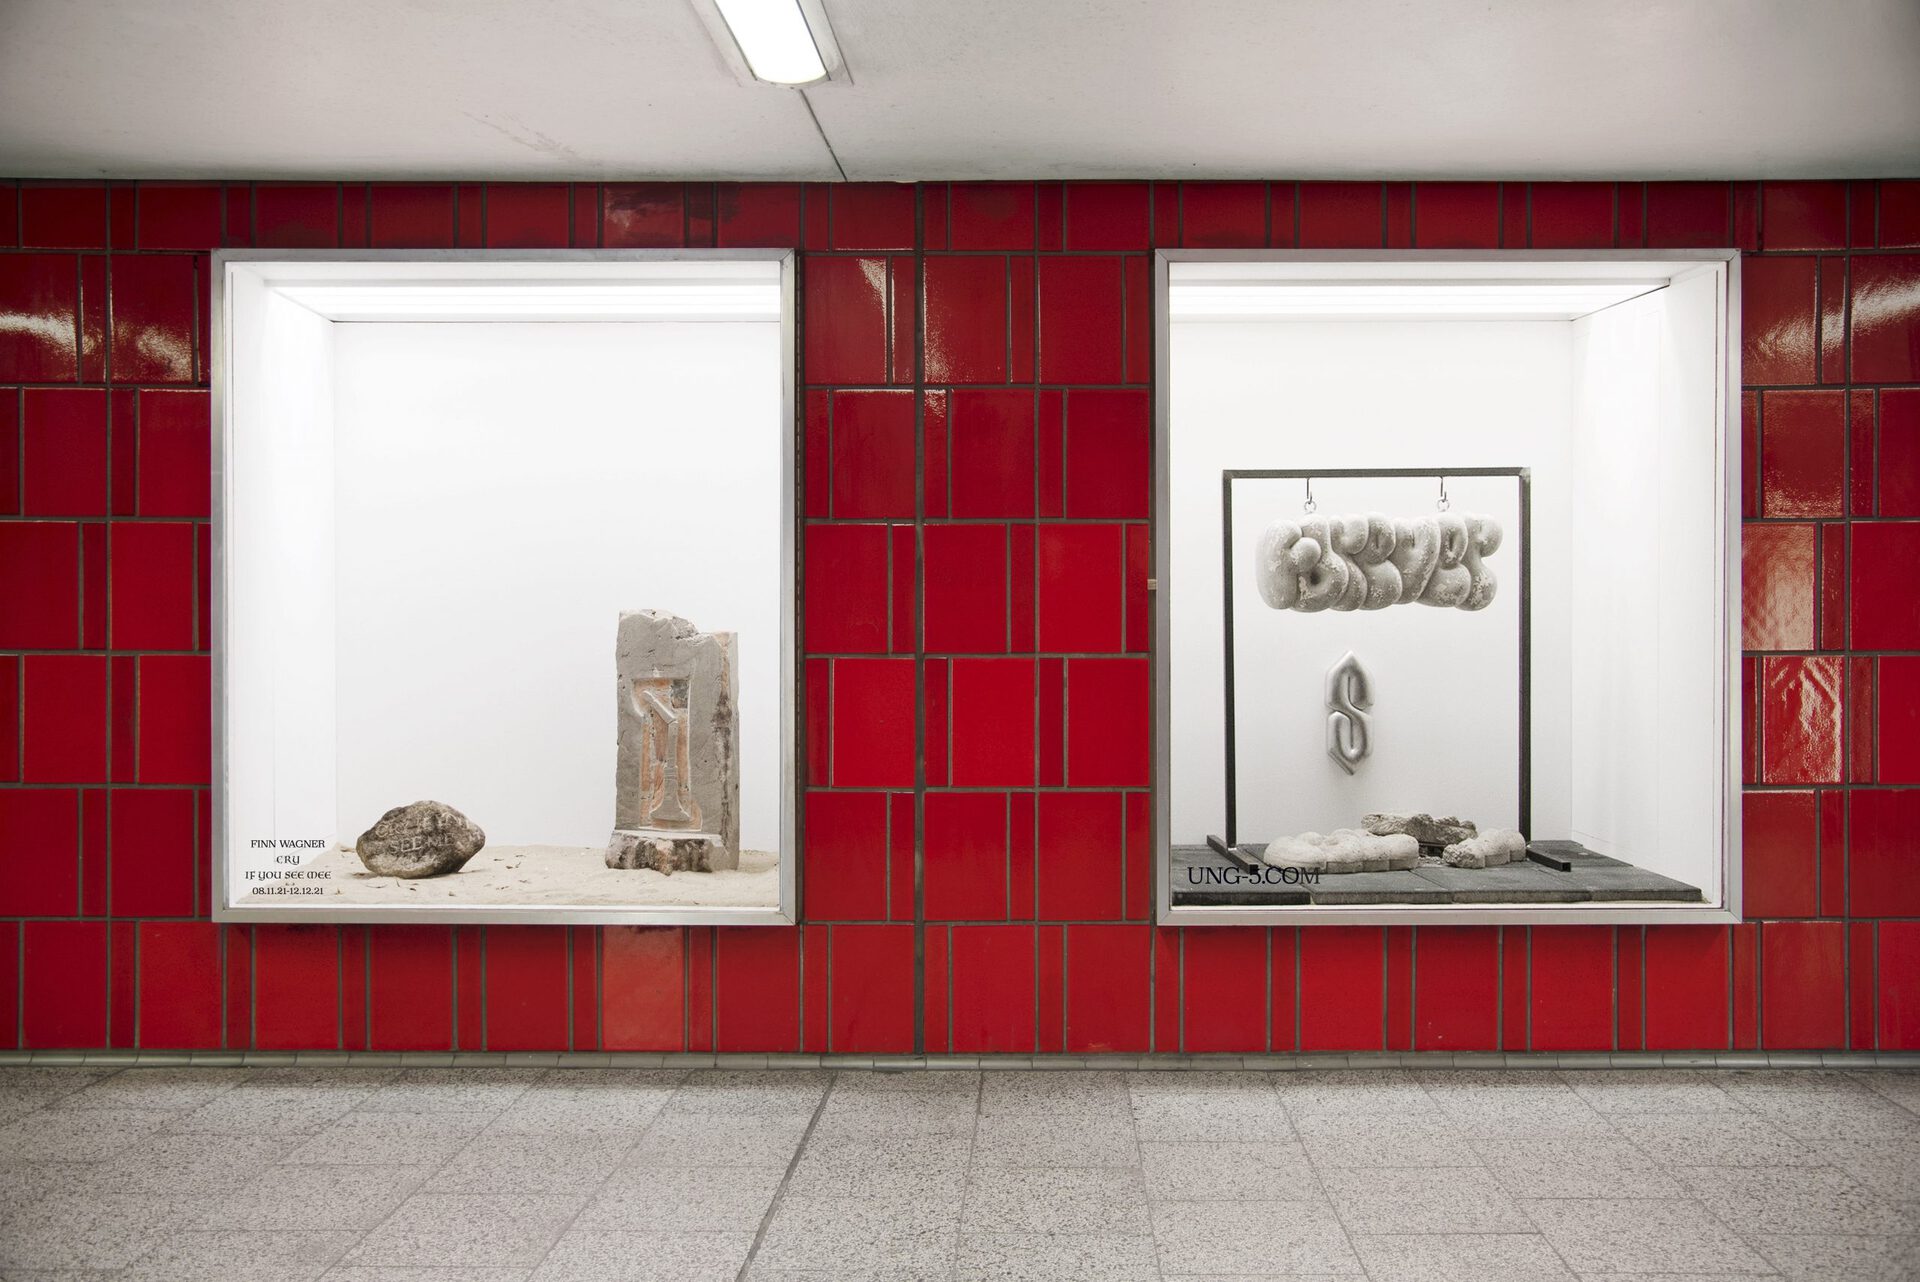 Finn Wagner, cry if you see me, 2021, aluminium cast, concrete, sand, stone, ww2 bunker wall, steel